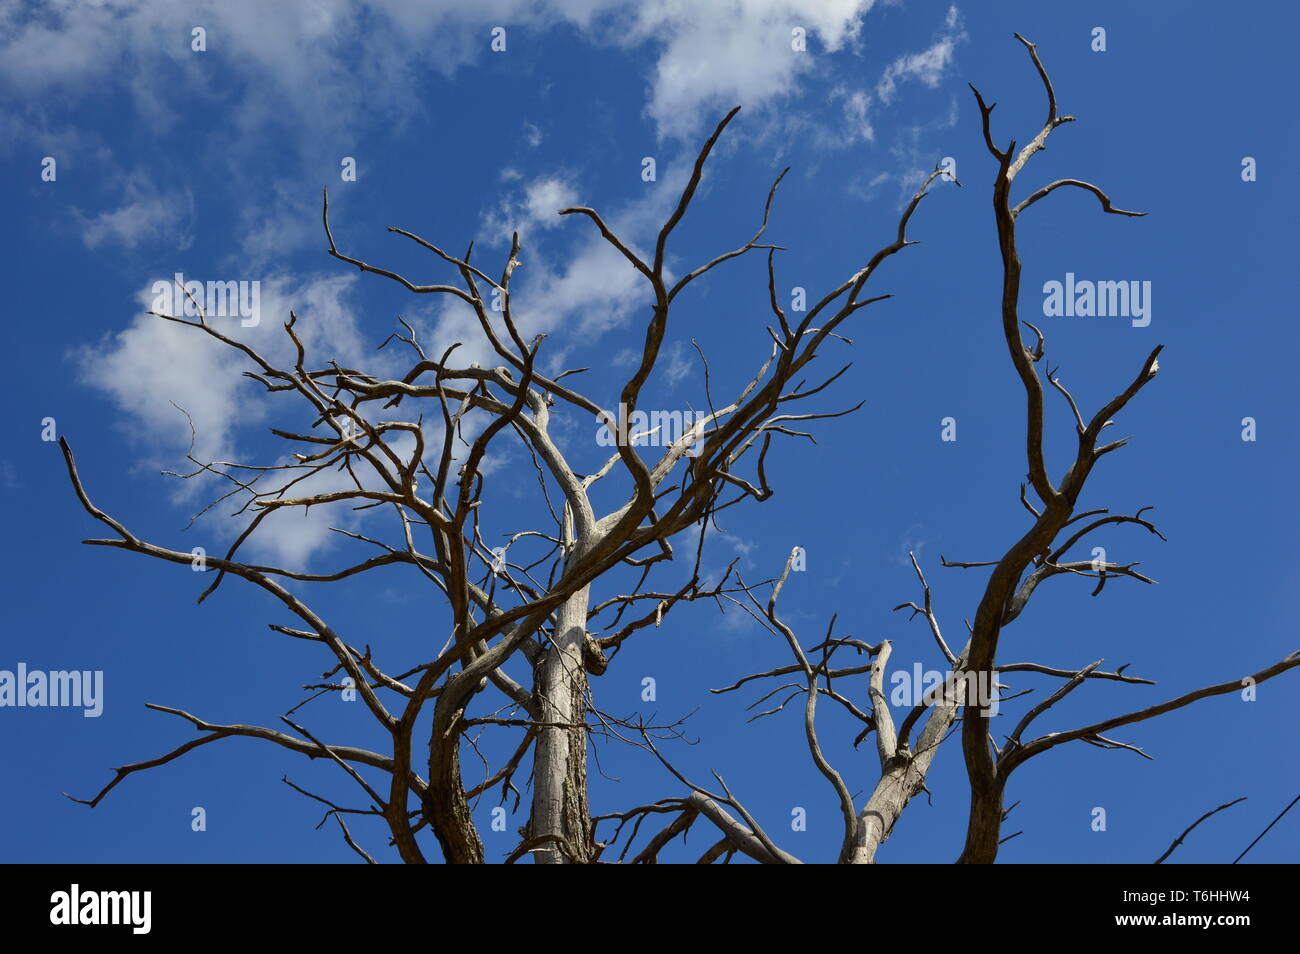 A Dead Tree in the forest with blue sky background Stock Photo